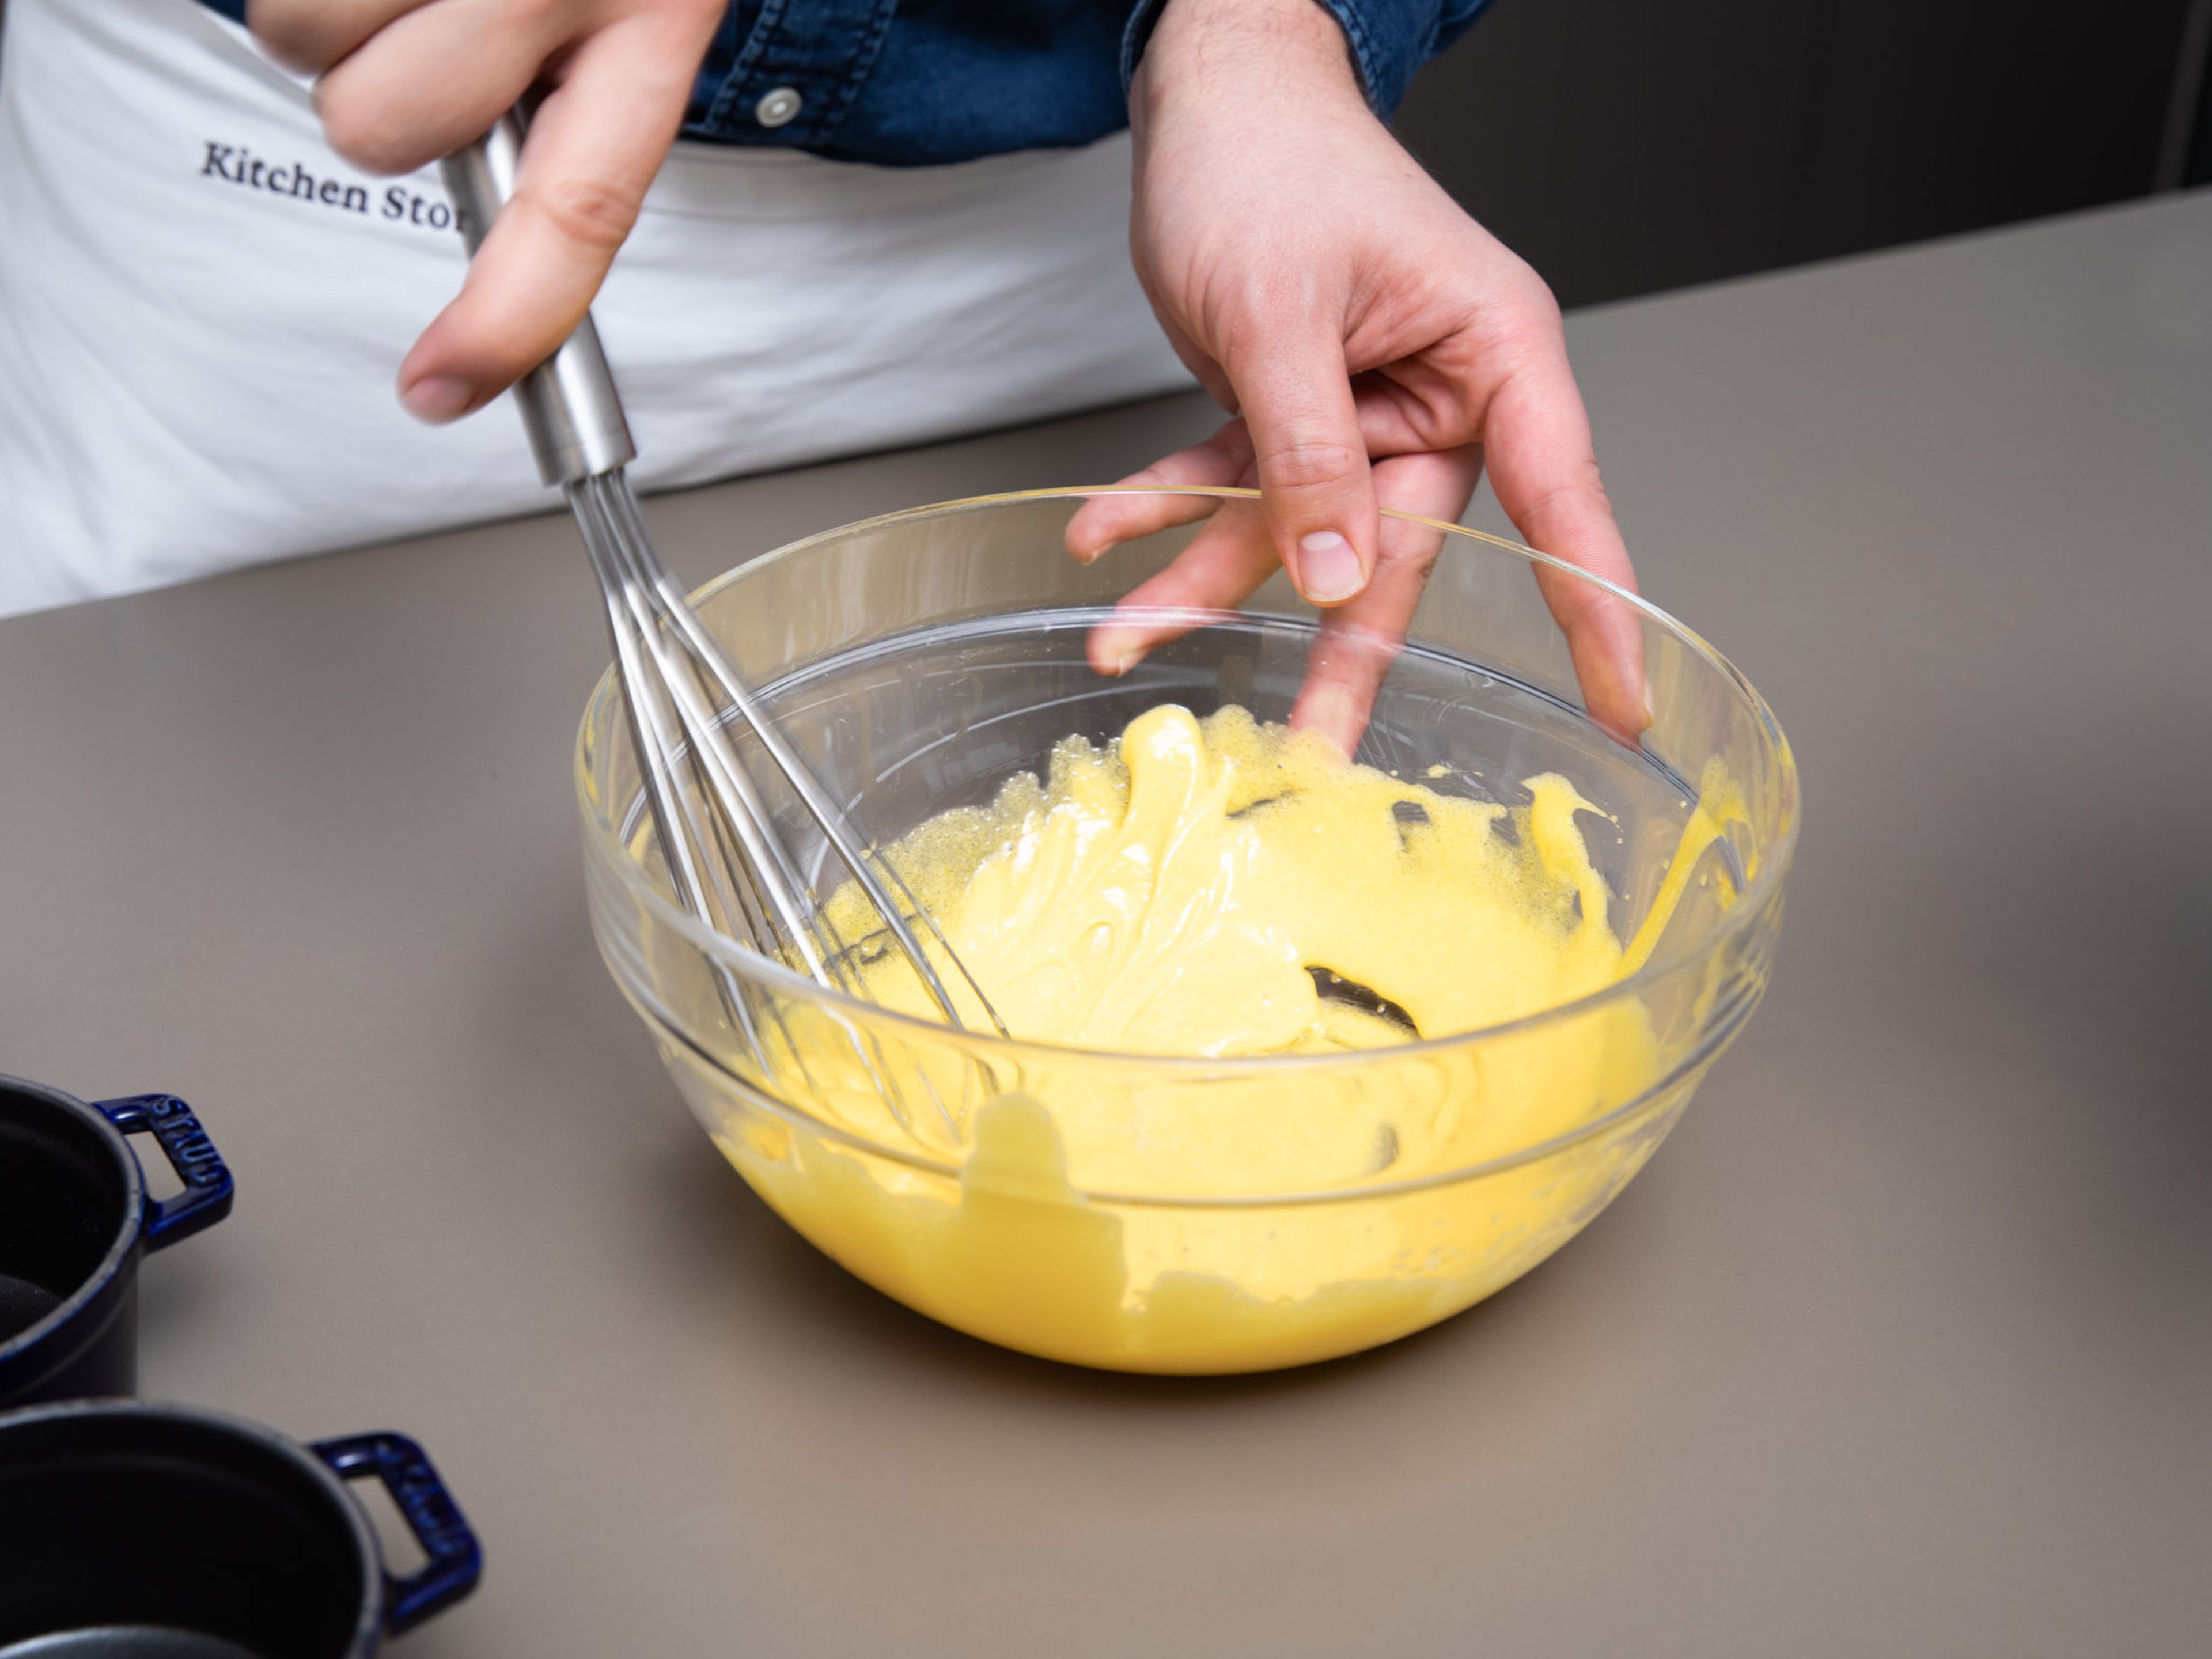 Add egg yolks and some sugar to a bowl and whisk until foamy. Stream in the hot milk and cream mixture while whisking continuously.